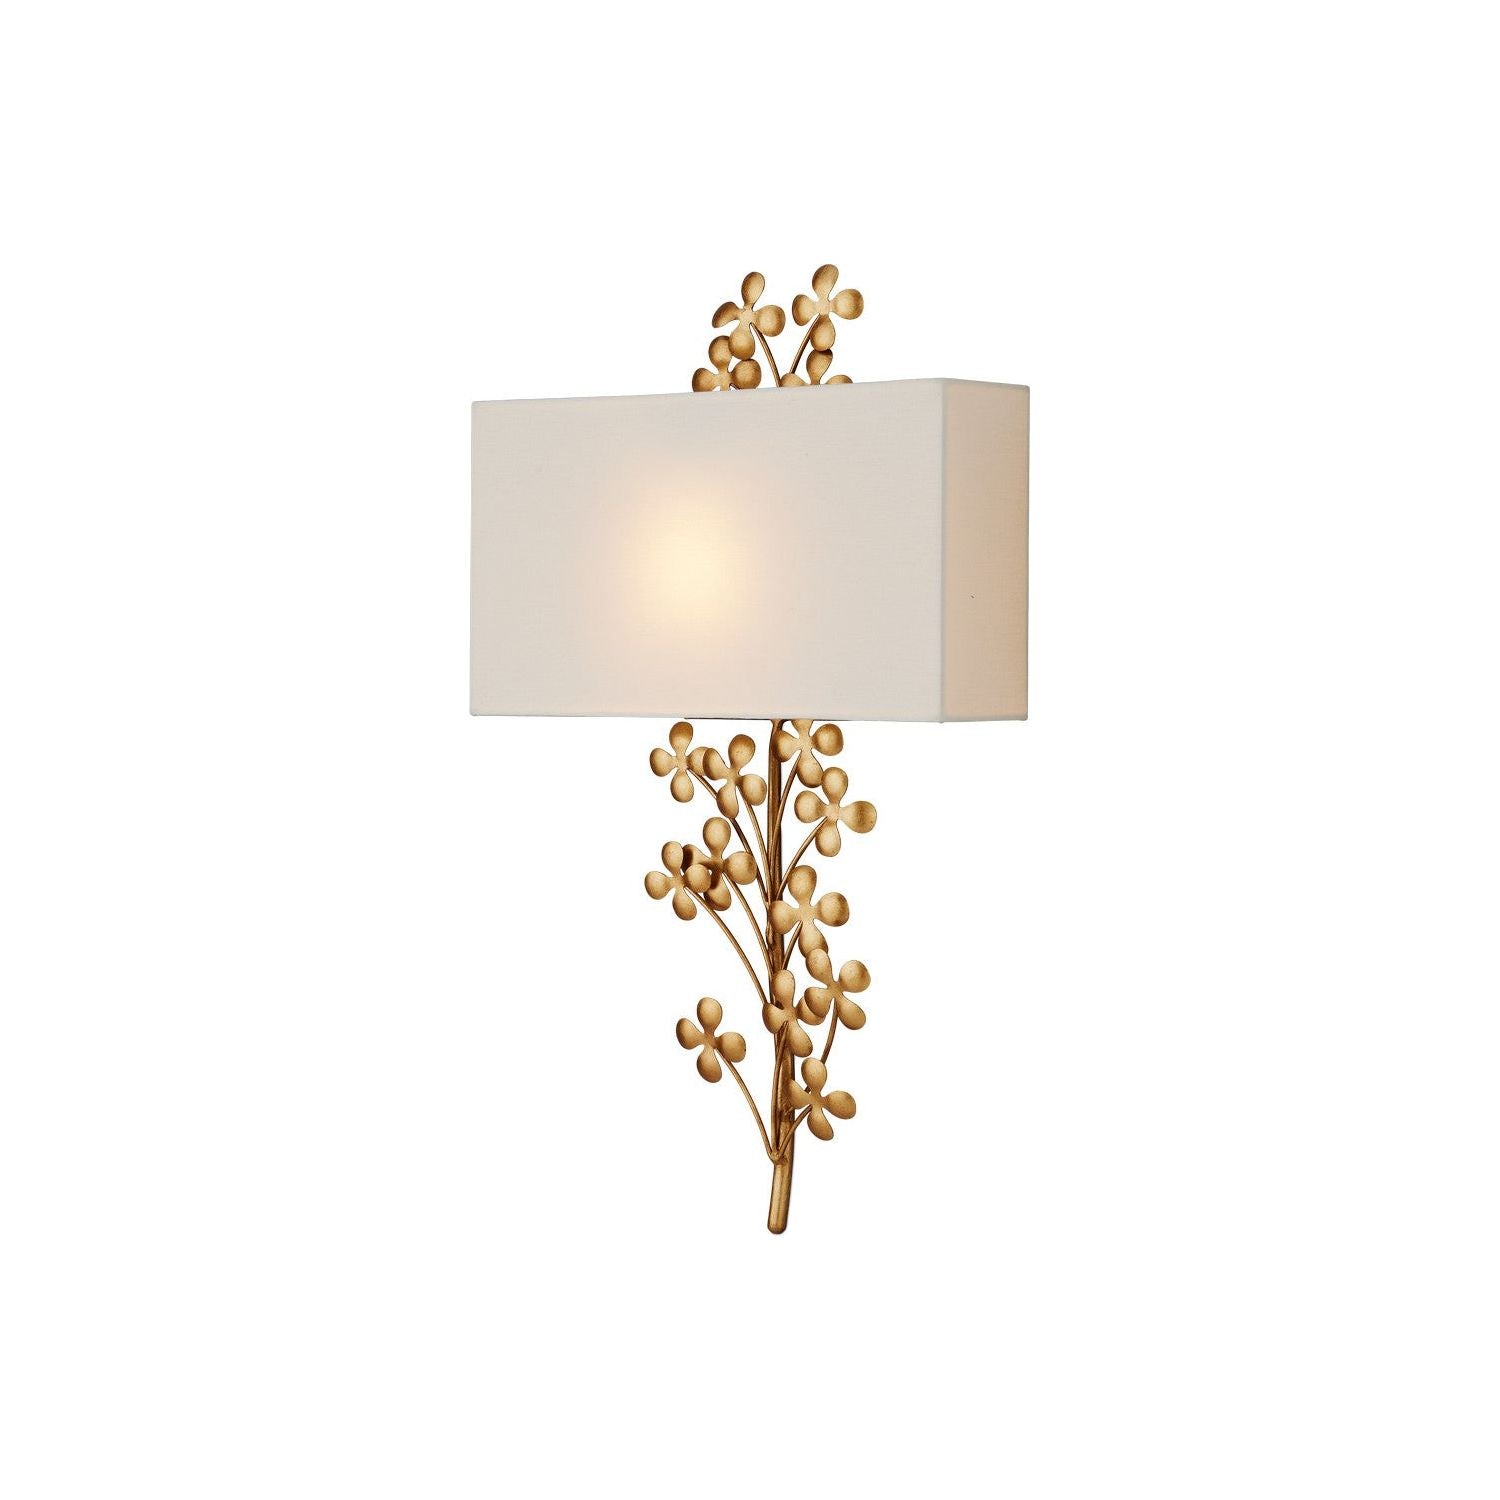 Currey and Company - 5900-0056 - One Light Wall Sconce - Contemporary Gold Leaf/Contemporary Gold